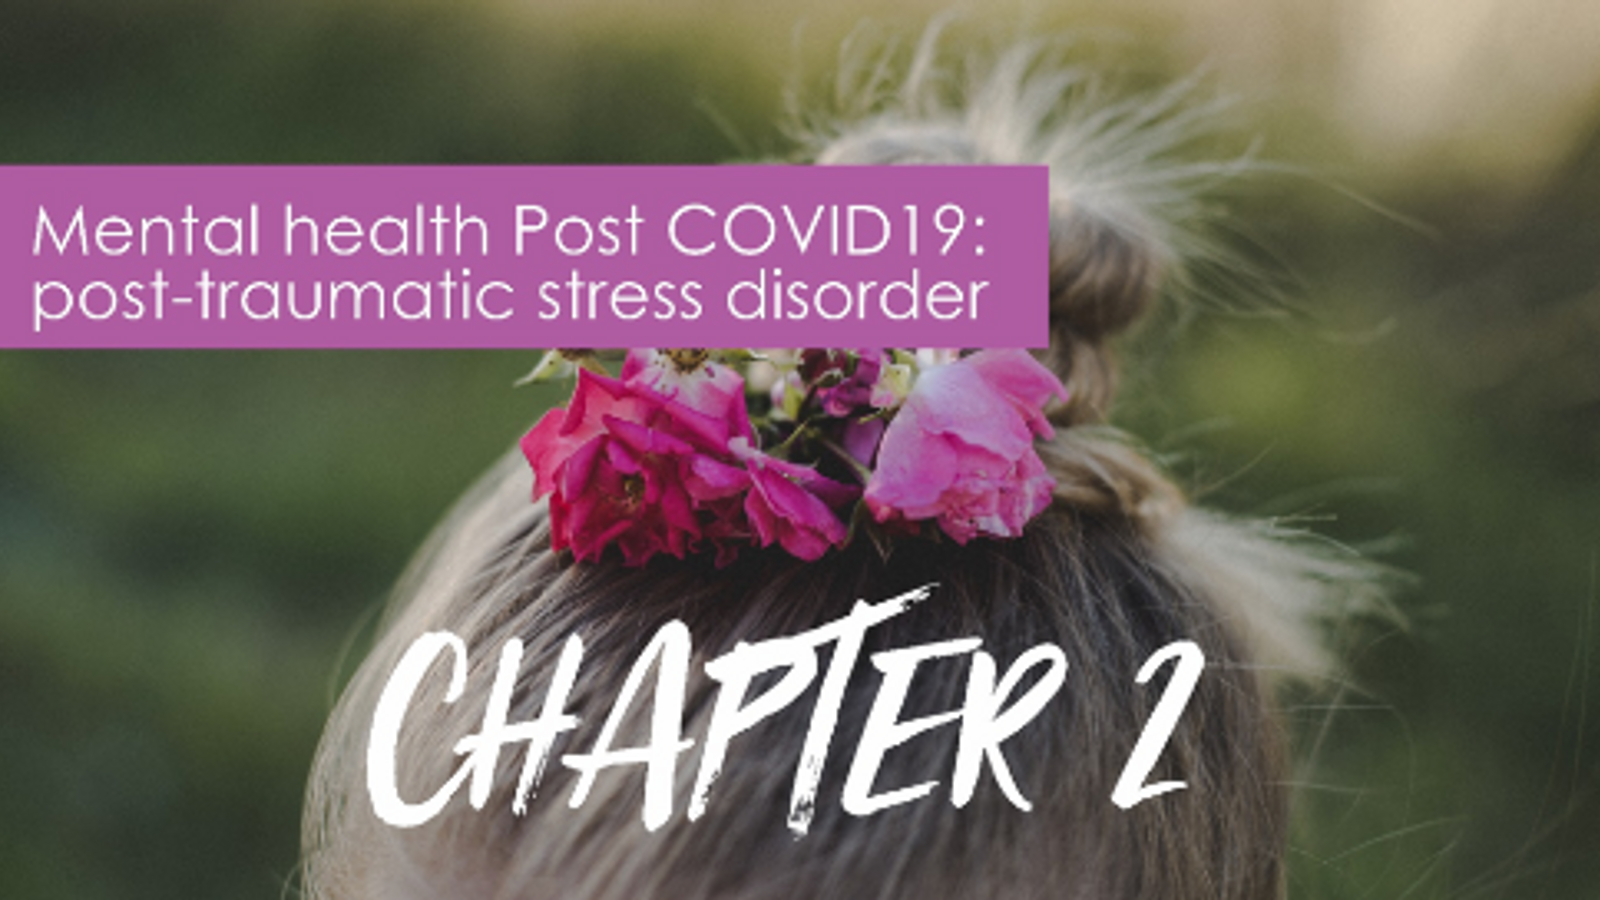 Mental health Post COVID19 : post-traumatic stress disorder CHAPTER 2 | Institutional support. The start to social recovery.